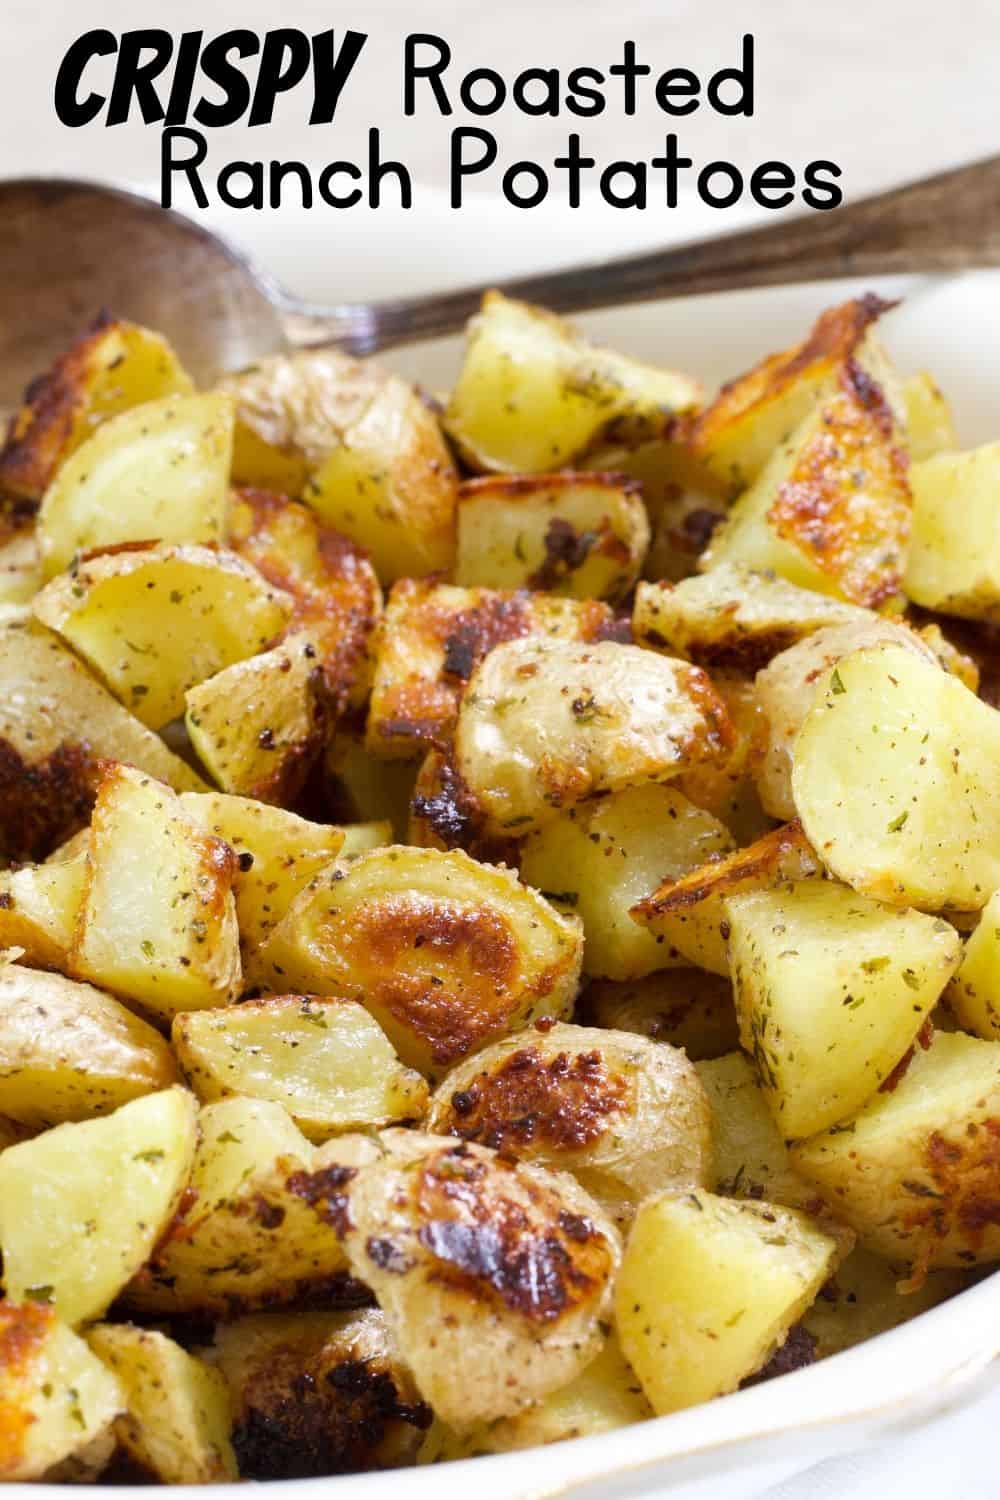 Roasted Ranch Potatoes - potatoes are drizzled with olive oil and tossed with Hidden Valley Ranch Dressing mix, salt and pepper then roasted. #ranchpotatoes #easysidedish #potatoes #kidfriendlyrecipe via @mindyscookingobsession